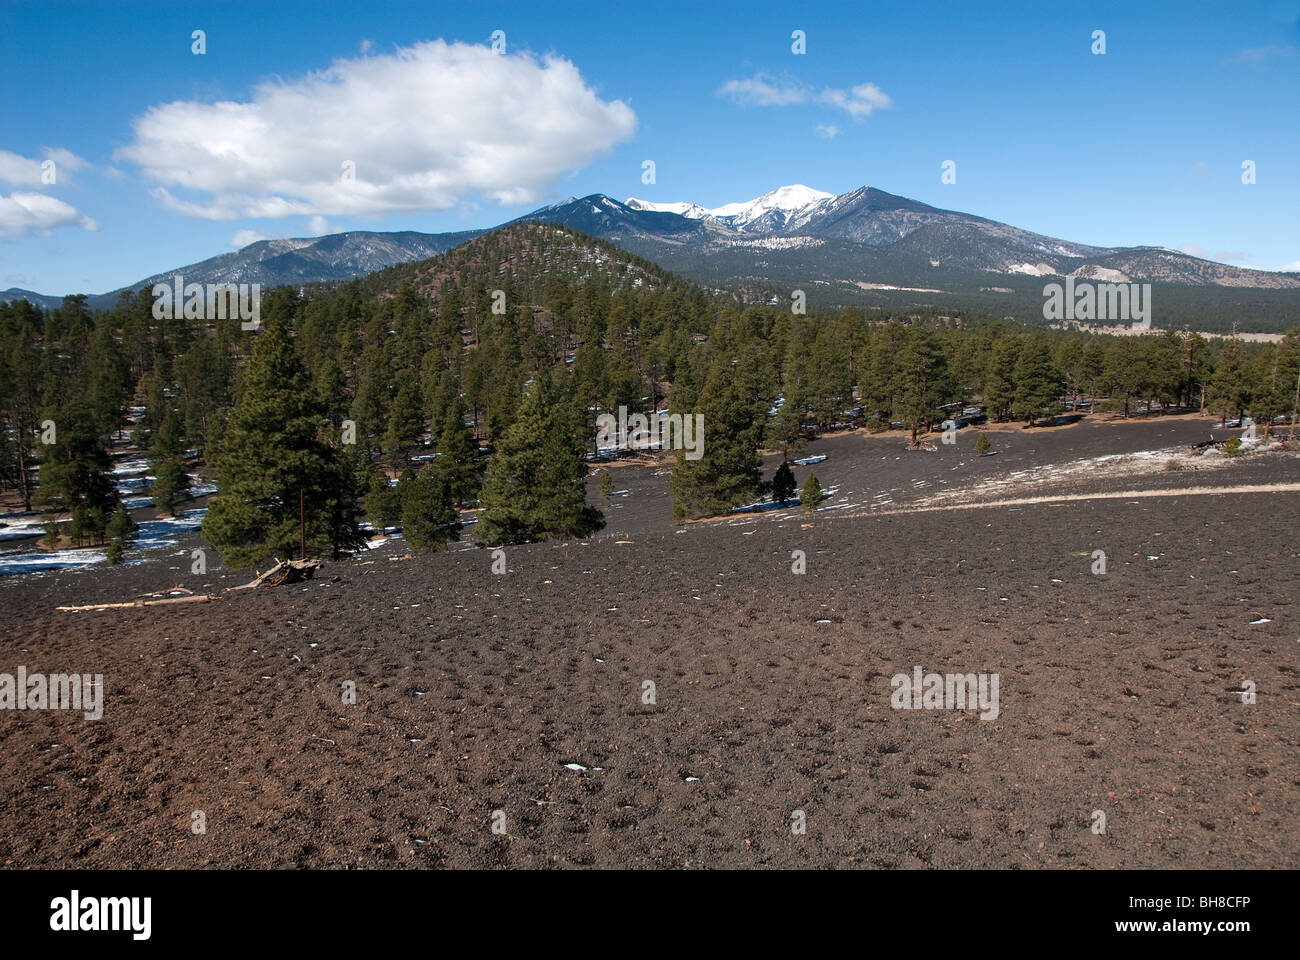 San Francisco Peaks from Lenox Crater Sunset Crater Volcano National Monument Arizona USA Stock Photo